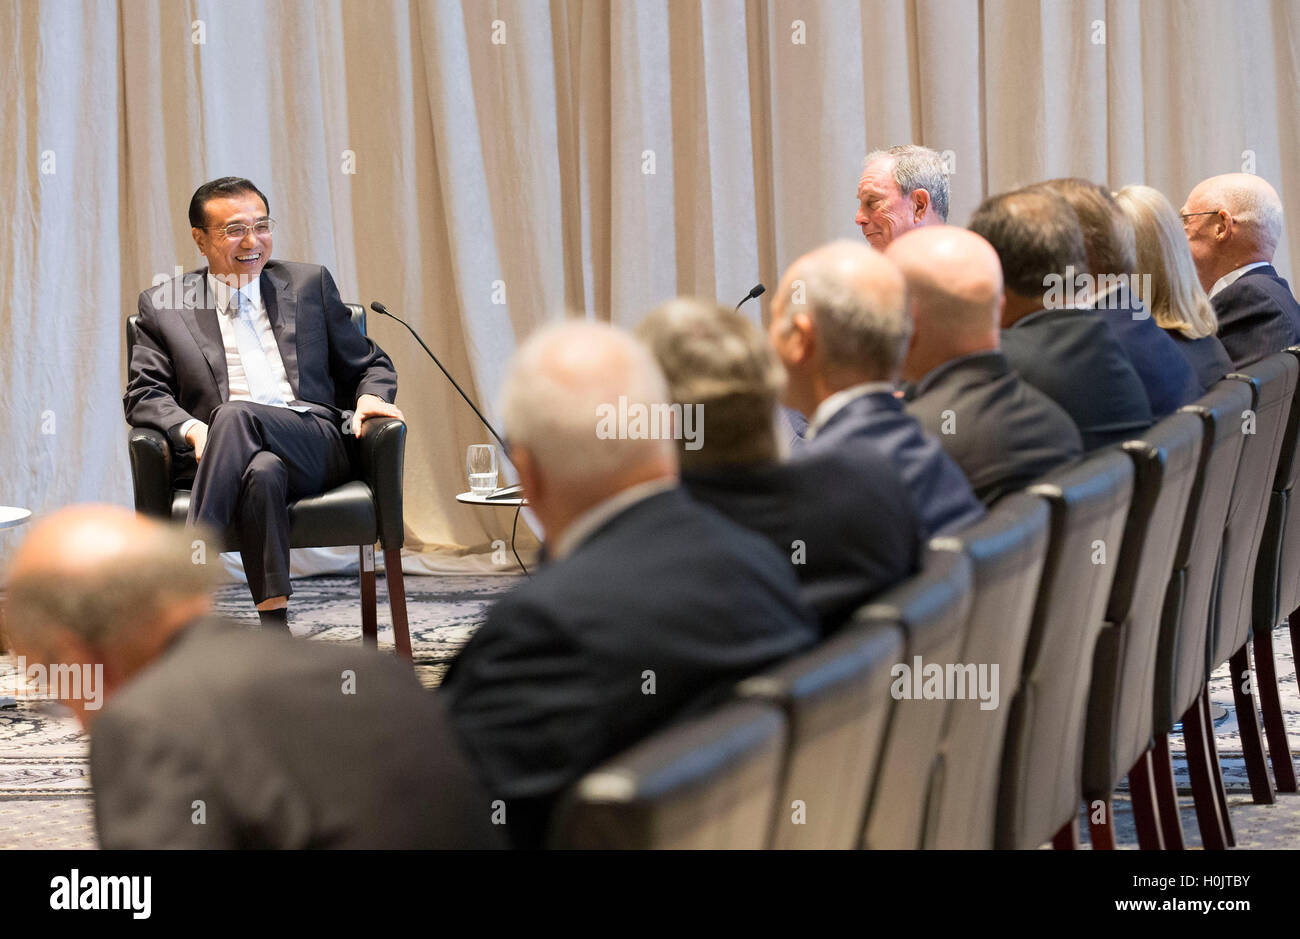 New York, USA. 20th Sep, 2016. Chinese Premier Li Keqiang (1st L) meets with a group of leading figures in the U.S. financial, think-tank and media circles to discuss bilateral ties and issues of common concern in New York Sept. 20, 2016. © Huang Jingwen/Xinhua/Alamy Live News Stock Photo